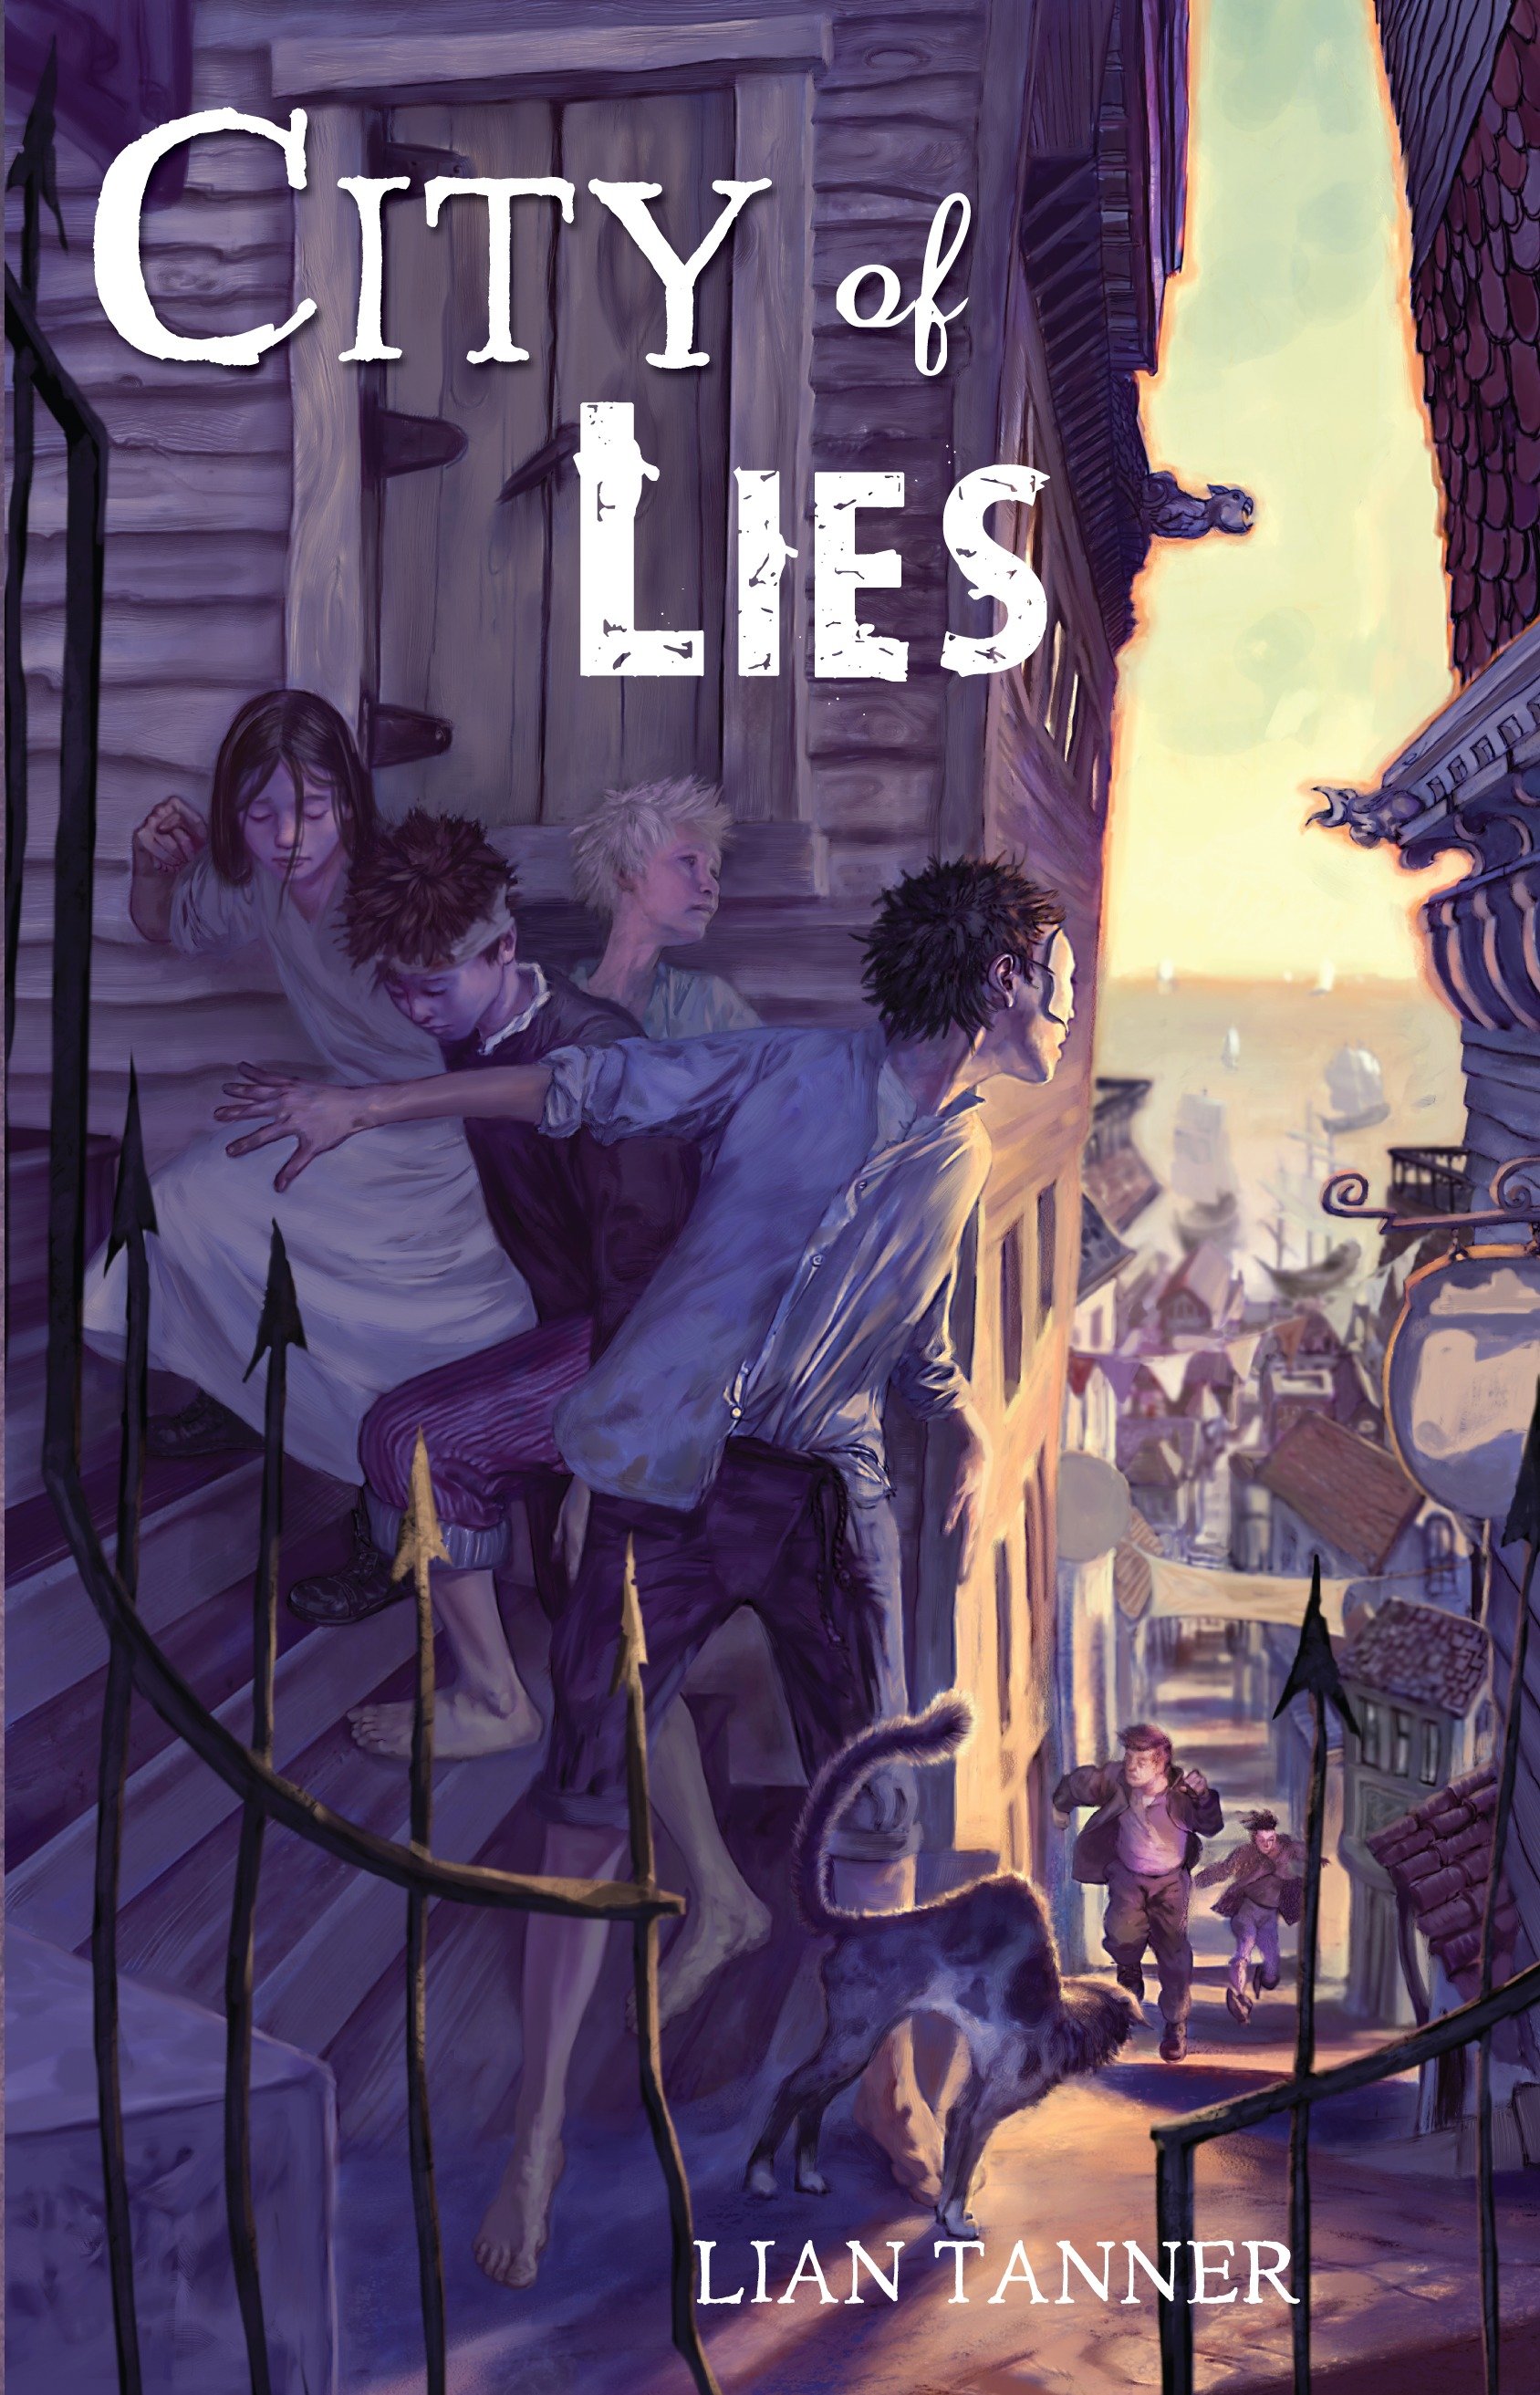 City of lies cover image